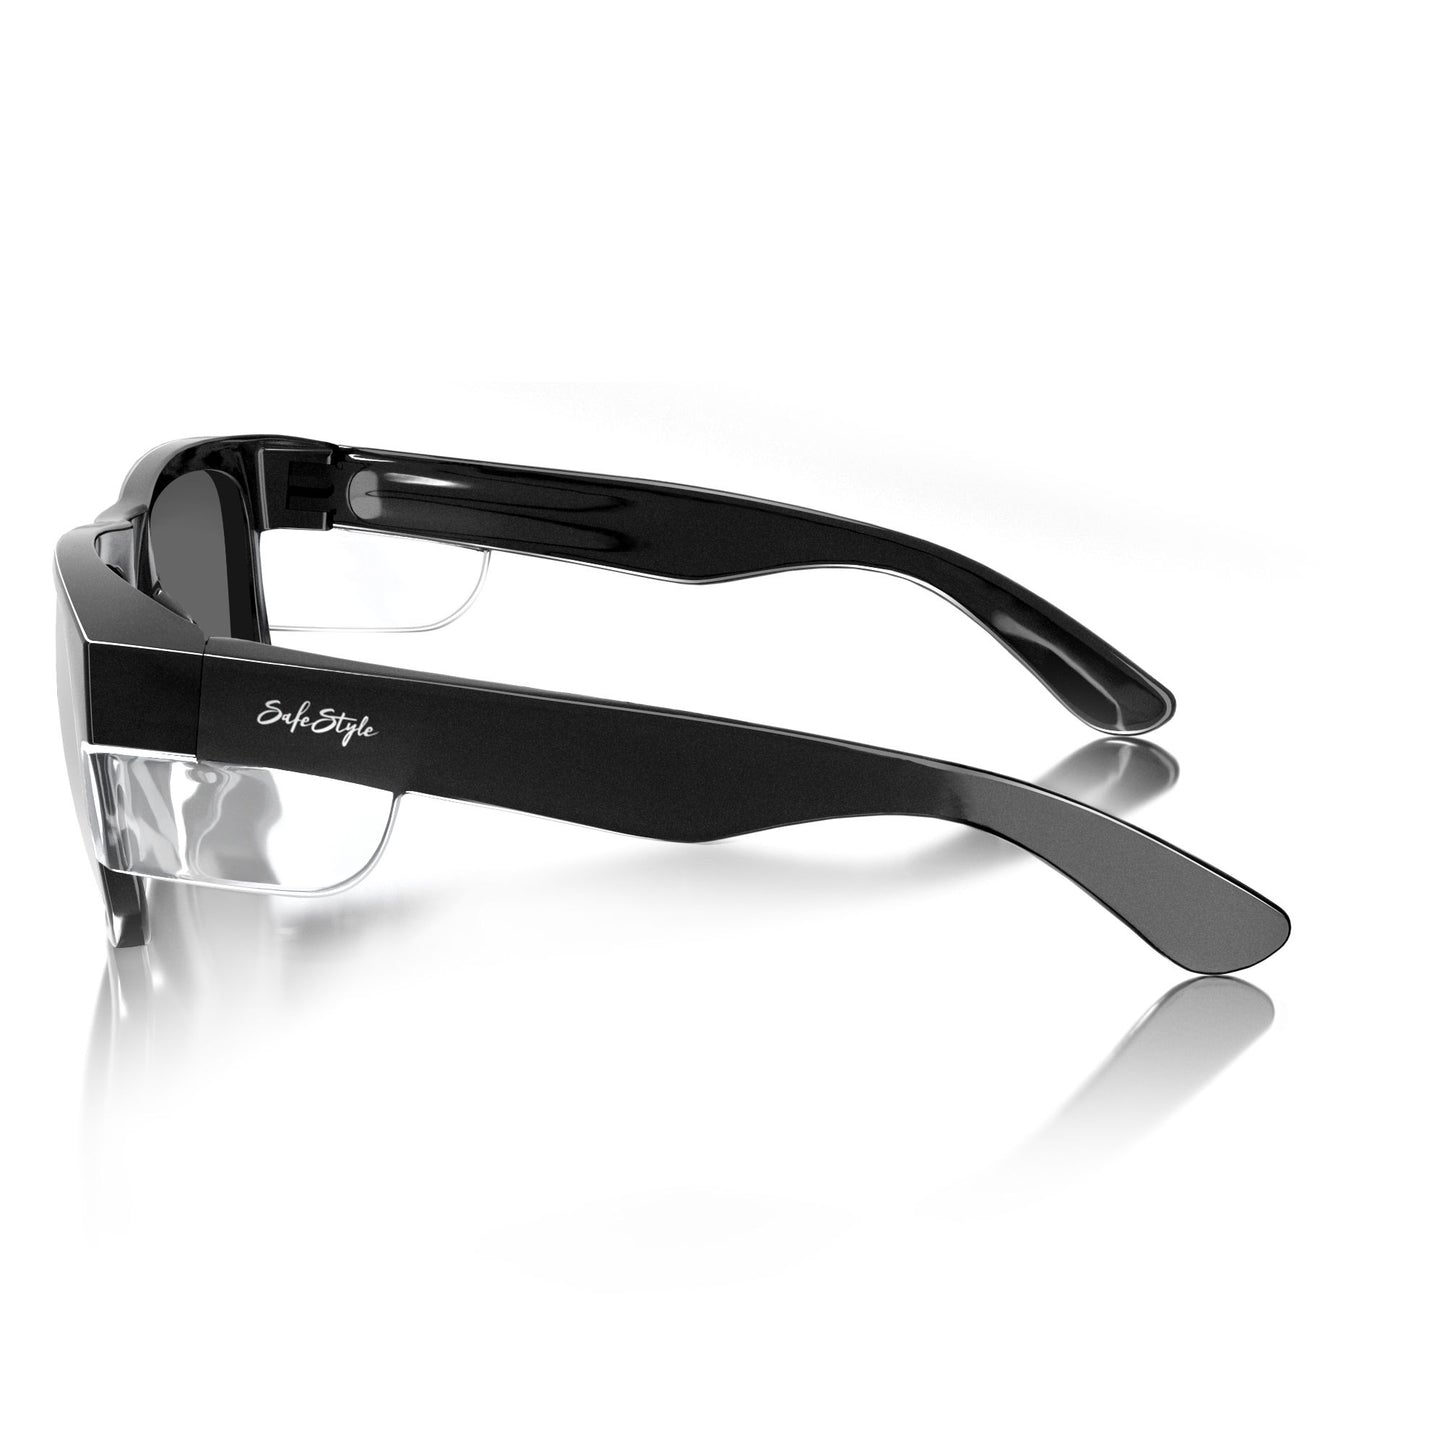 SafeStyle Fusions Black Frame/Tinted Lens